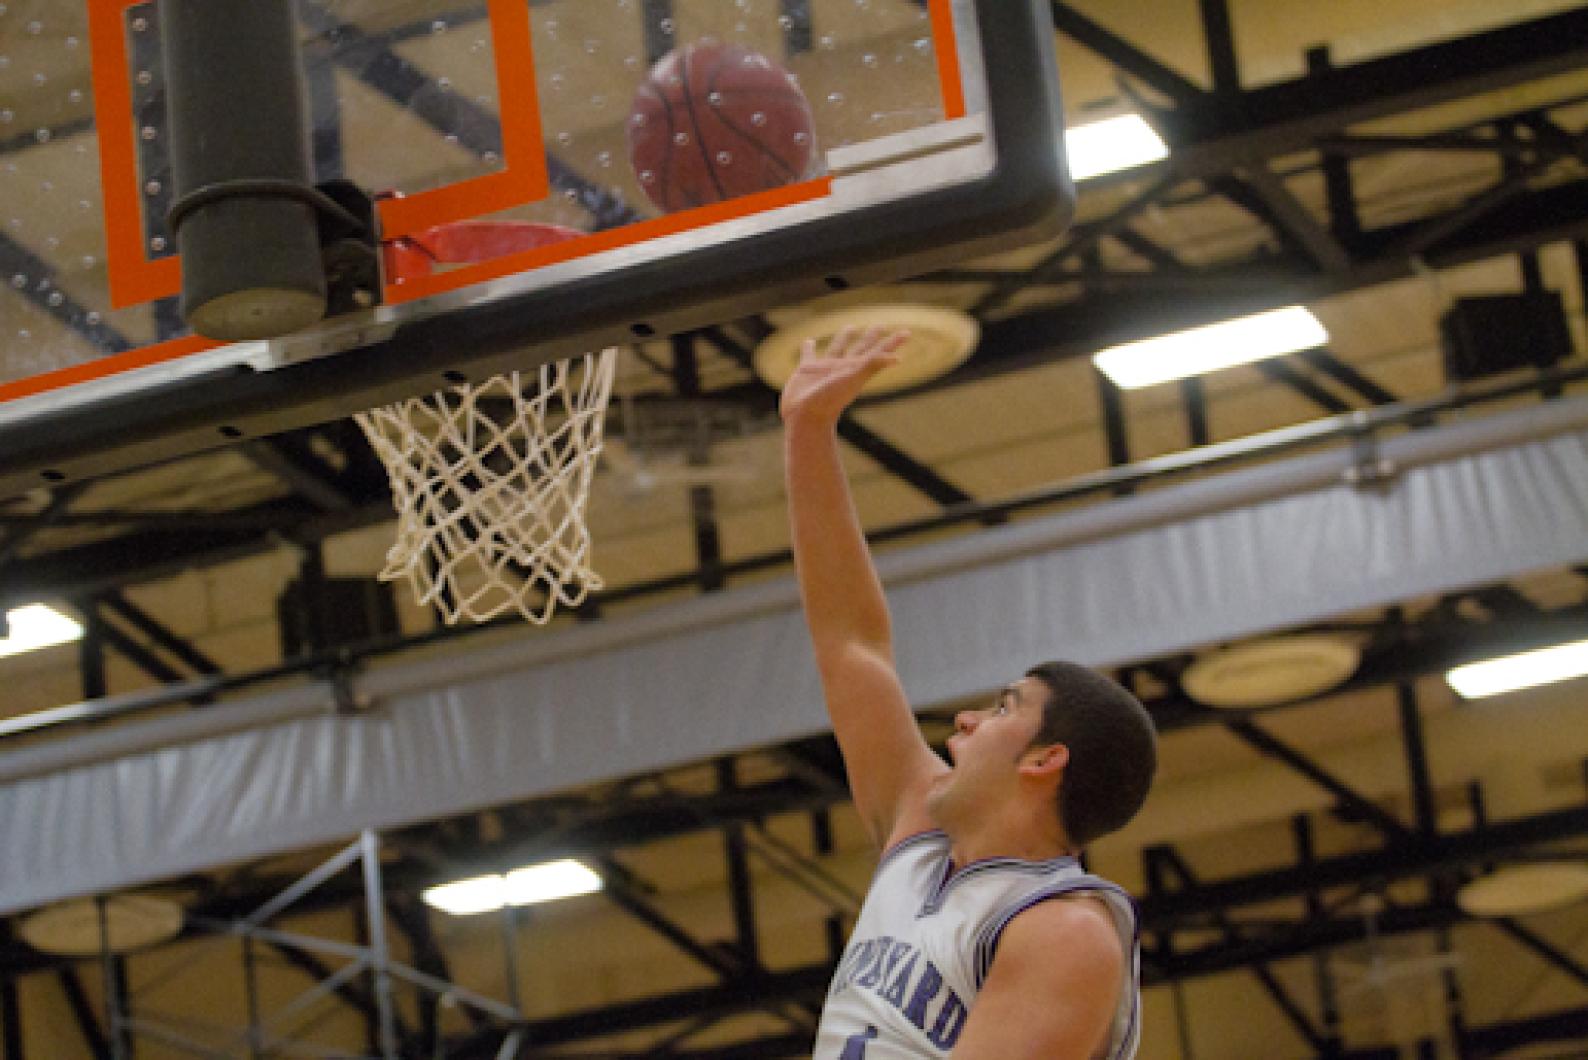 Senior Del Araujo tips it into the basket during a semifinal match Wednesday against Westwood.